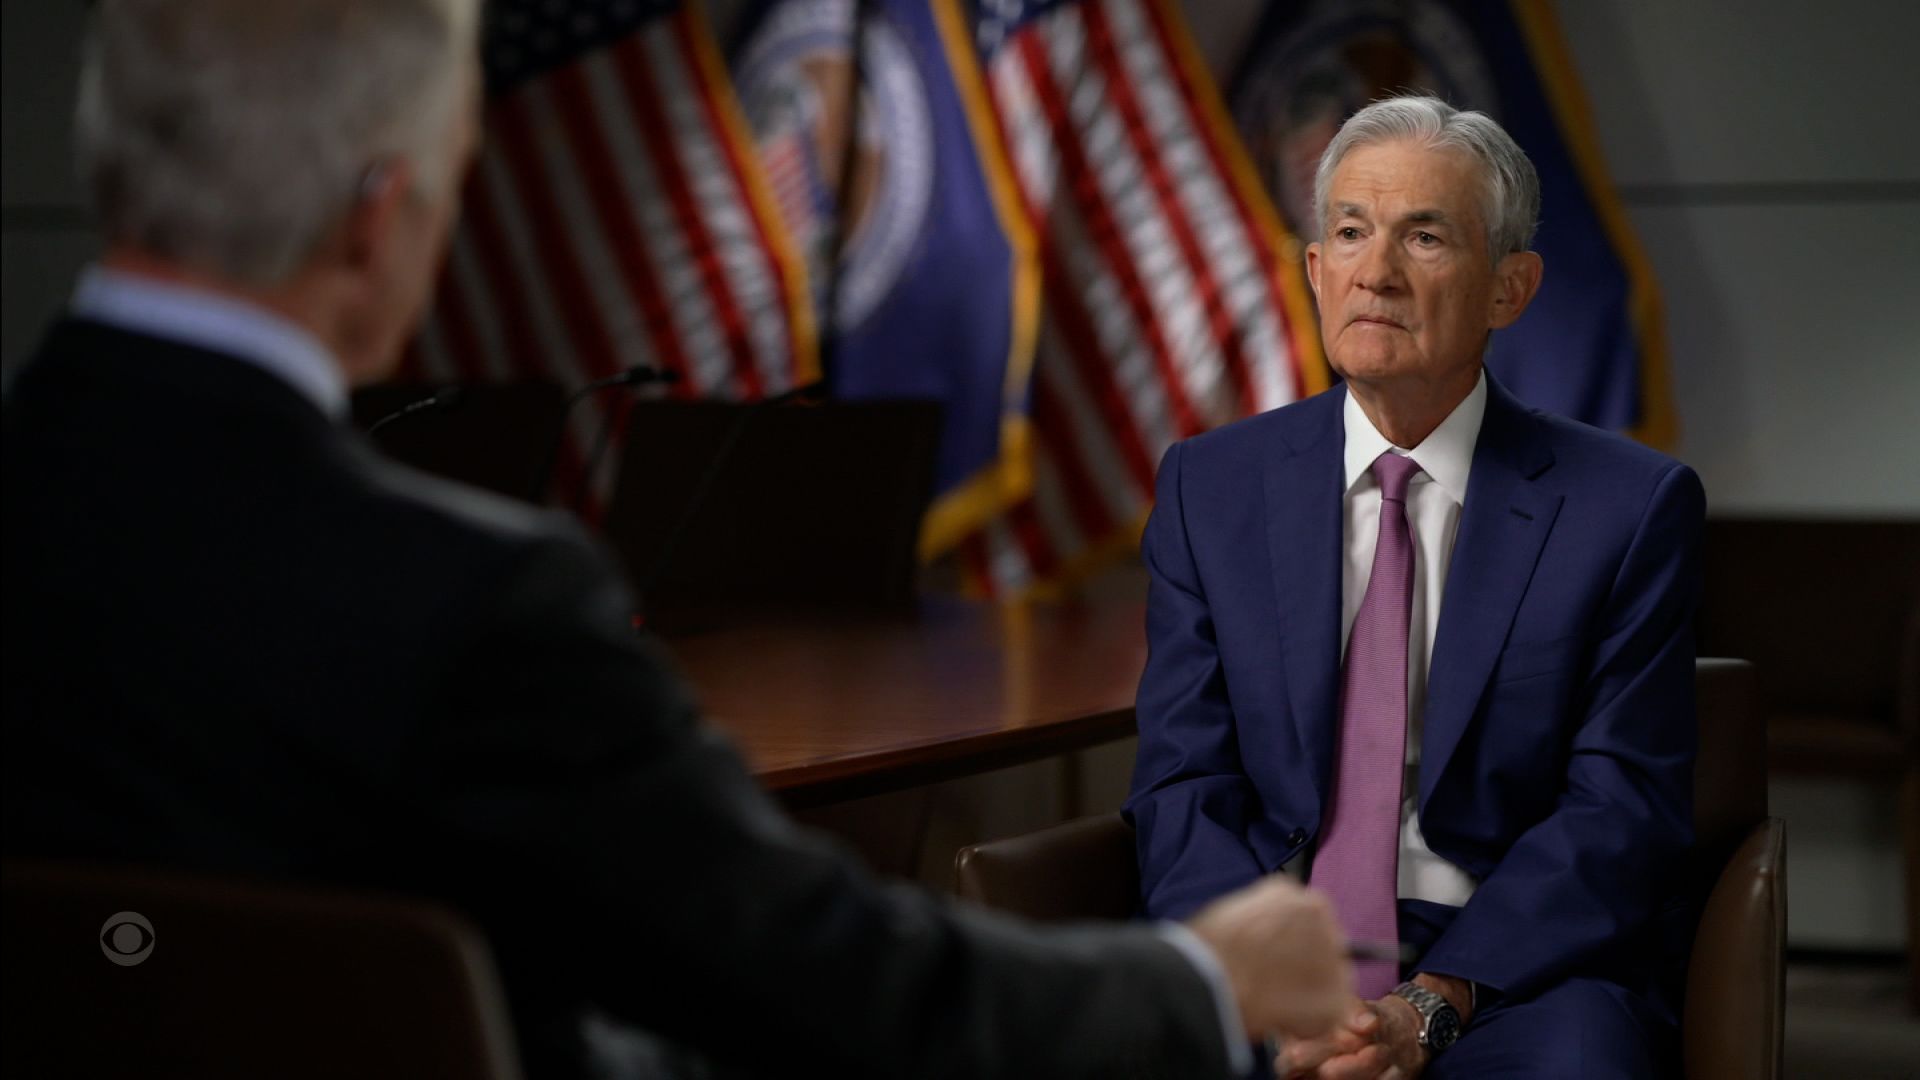 Federal Reserve Chair Jerome Powell during a CBS "60 Minutes" interview on Sunday night.